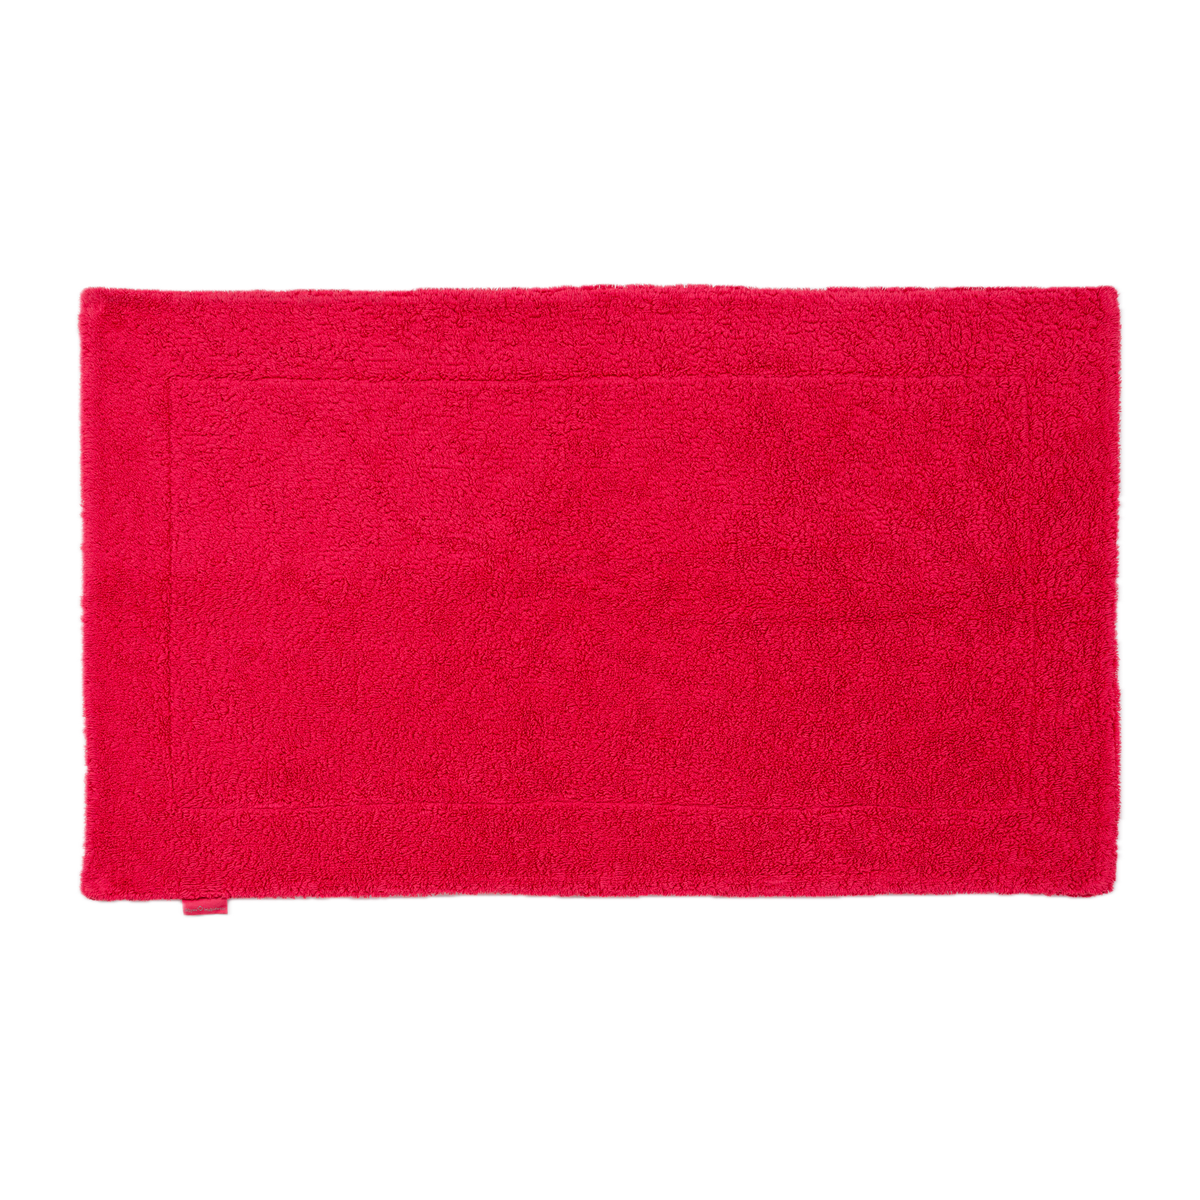 Abyss Double Bath Tub Mat in Viva Magenta (579) Color